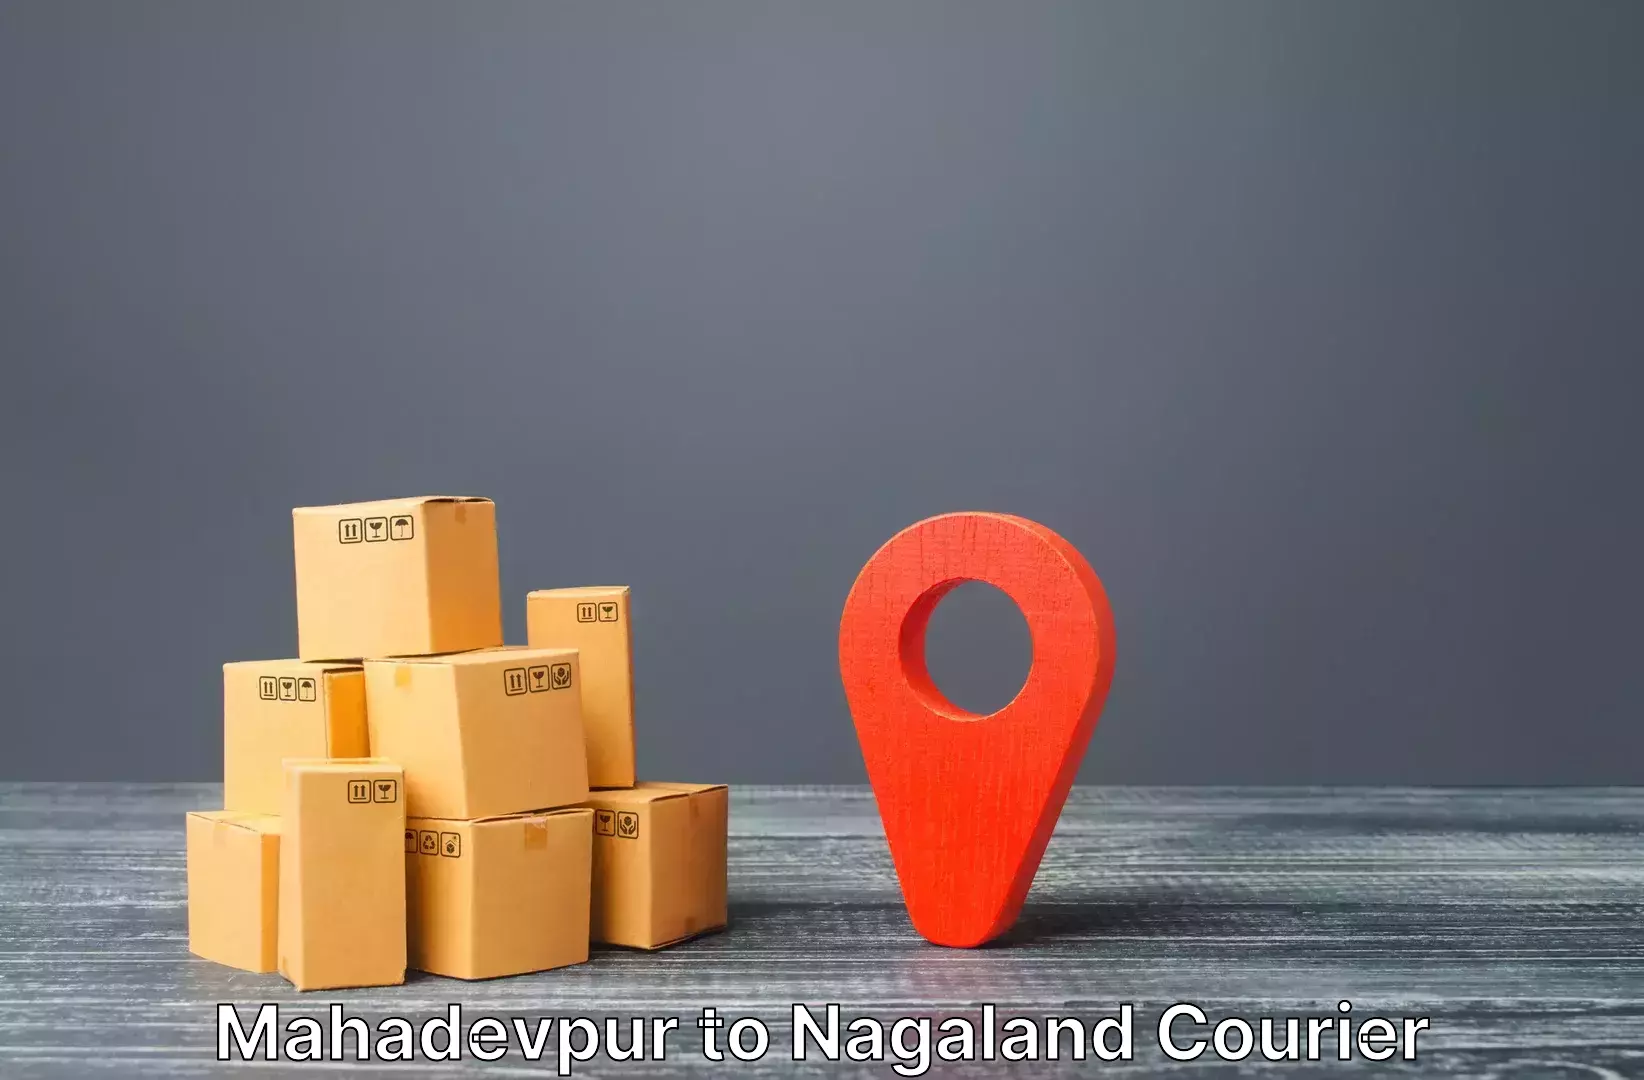 Luggage storage and delivery Mahadevpur to Nagaland